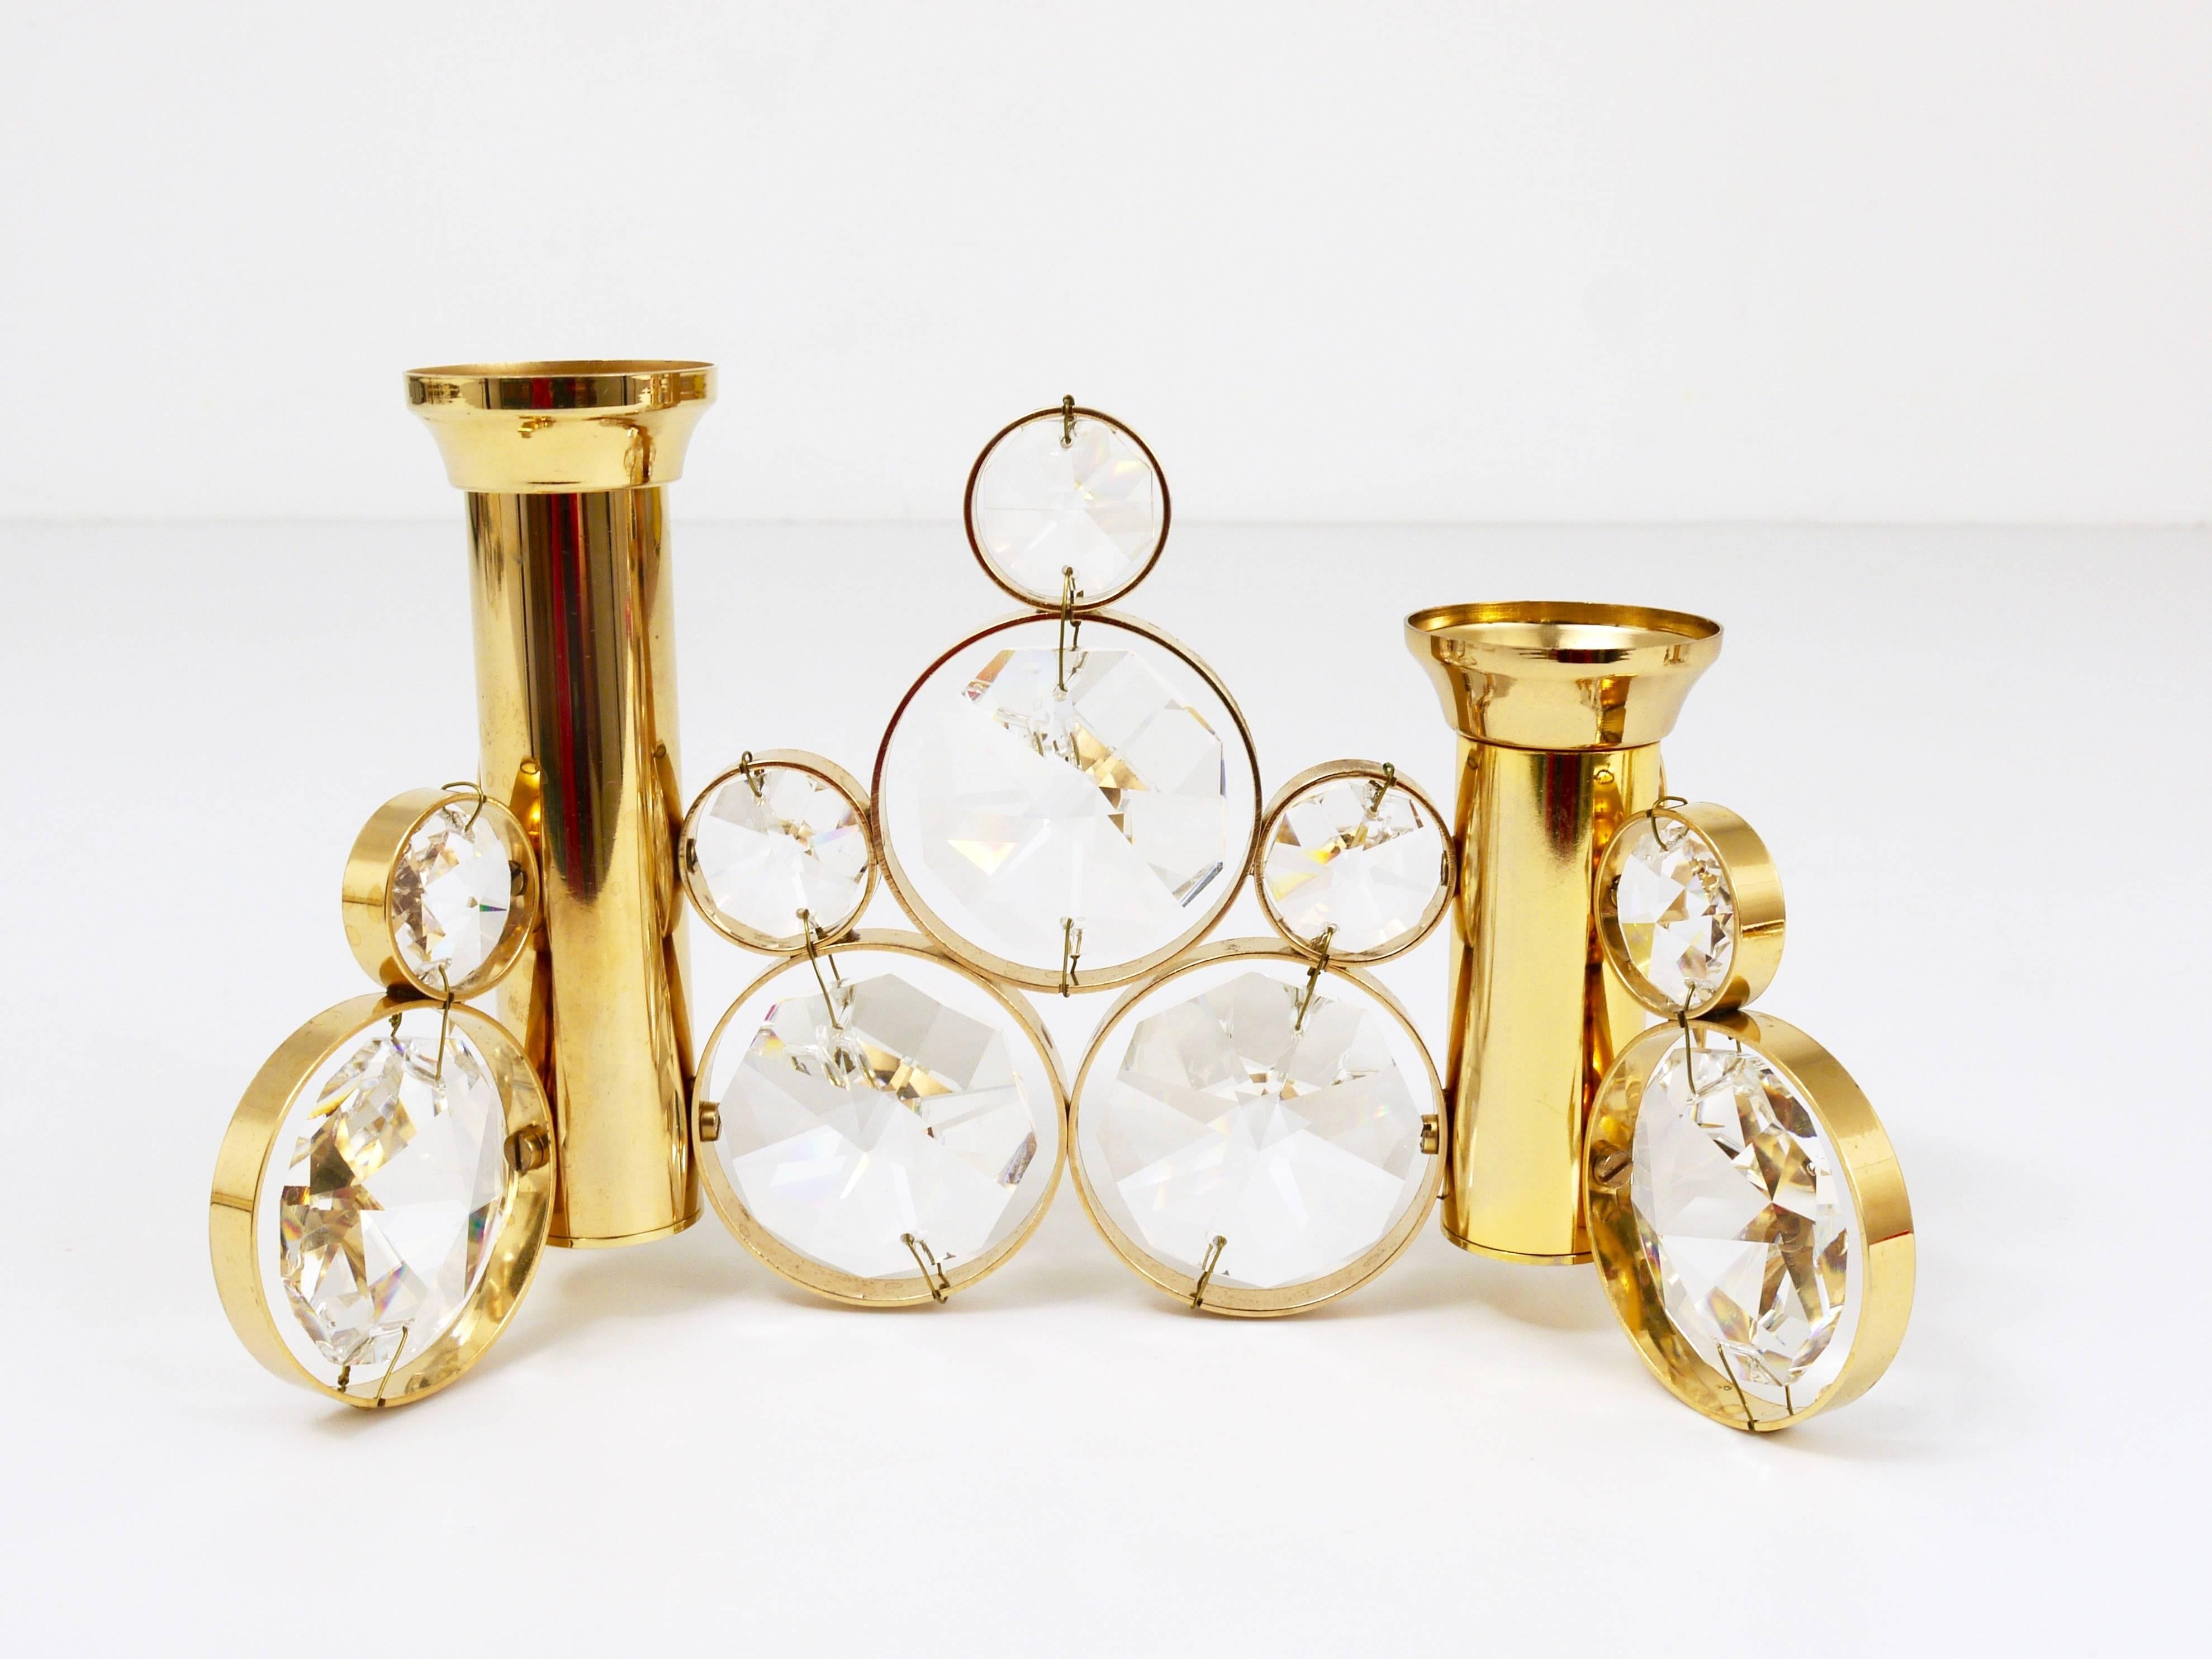 Palwa Gaetano Sciolari Style Brass & Crystal Candle Holder Candlestick, 1970s For Sale 2